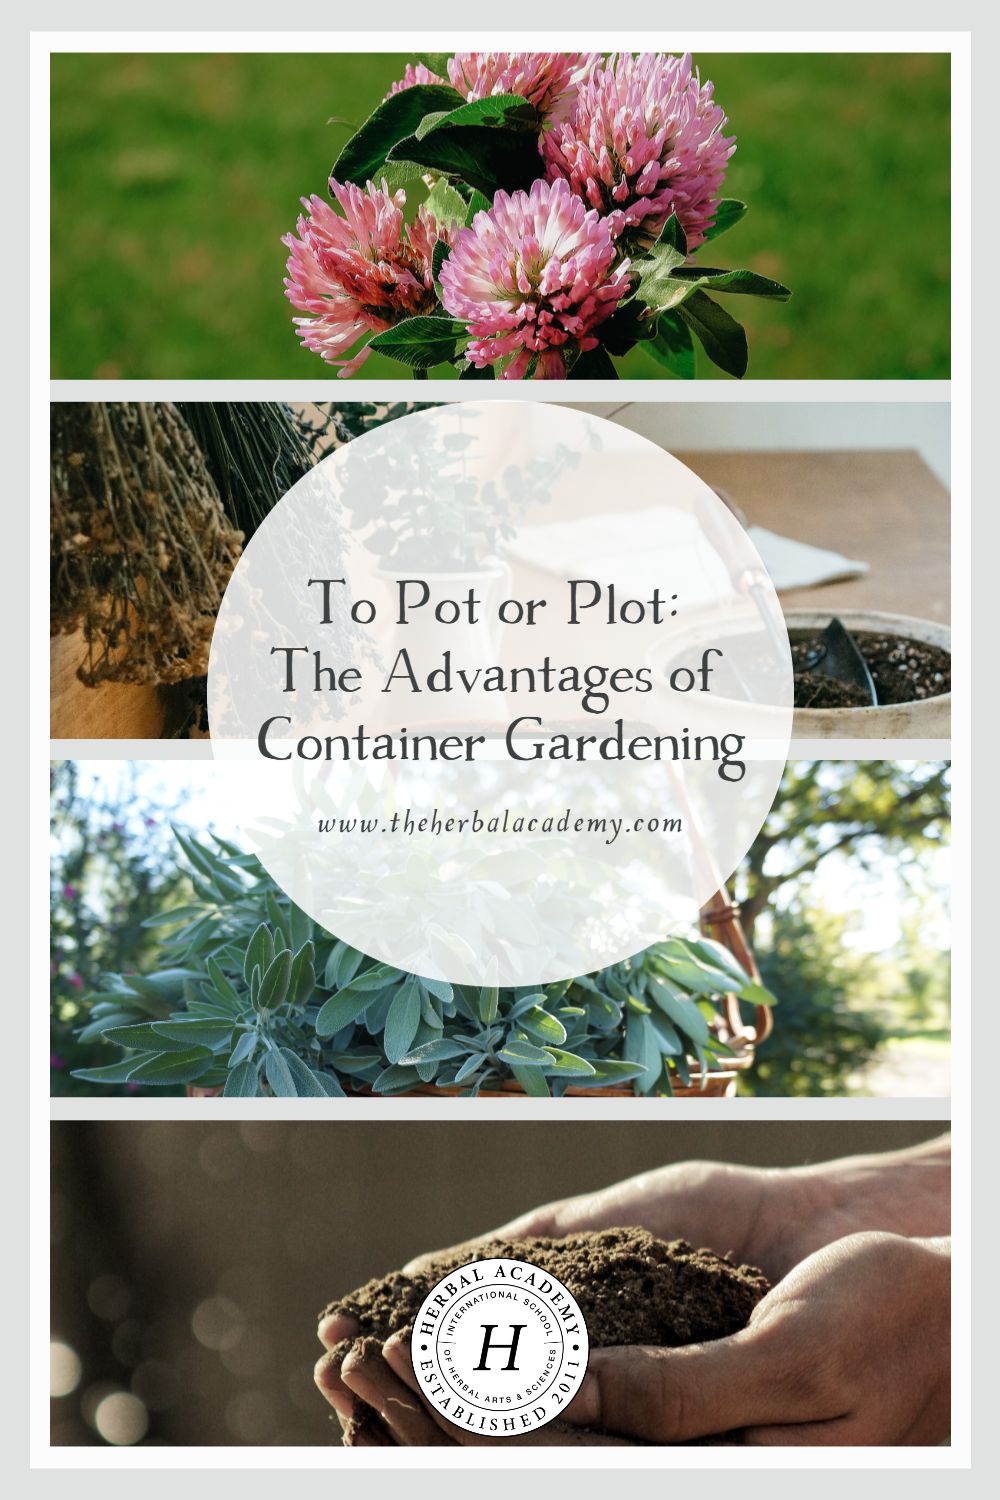 To Pot or Plot: The Advantages of Container Gardening | Herbal Academy | While making plans for your garden, consider container gardening as a fantastic solution for problem-solving many of your planting variables.